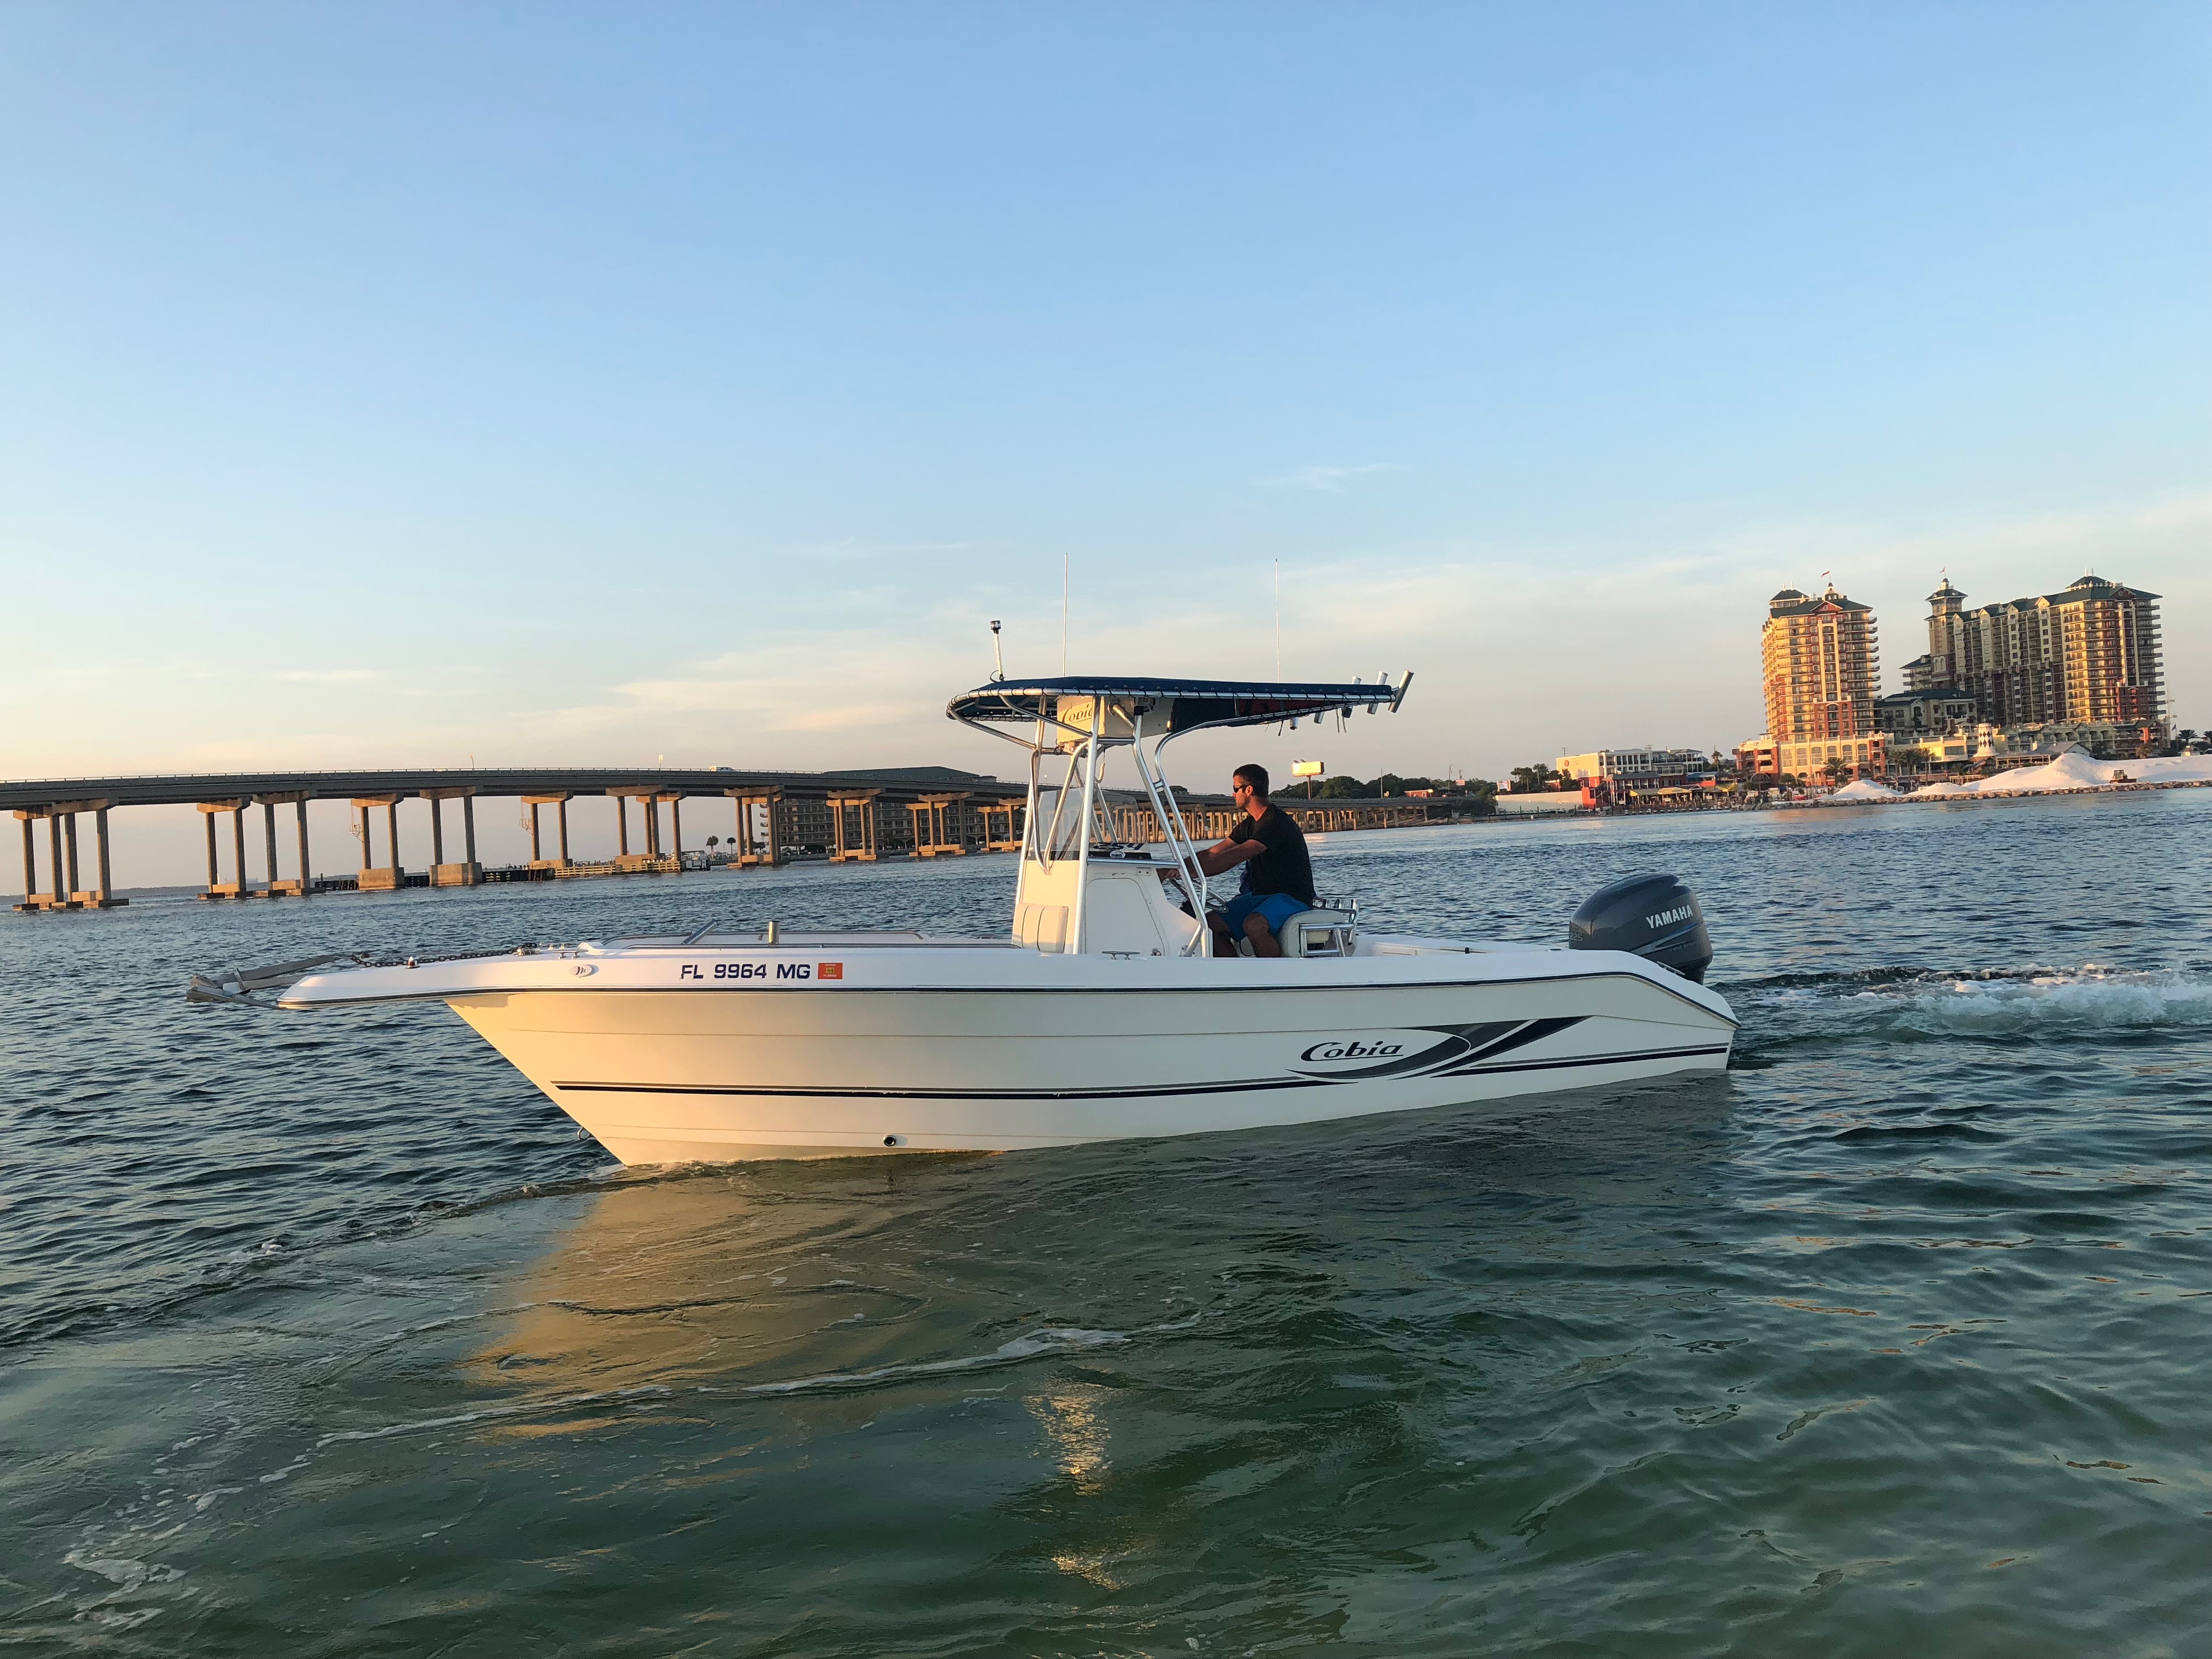 Destin Fishing Boat Rentals- Voted Best on the Emerald Coast